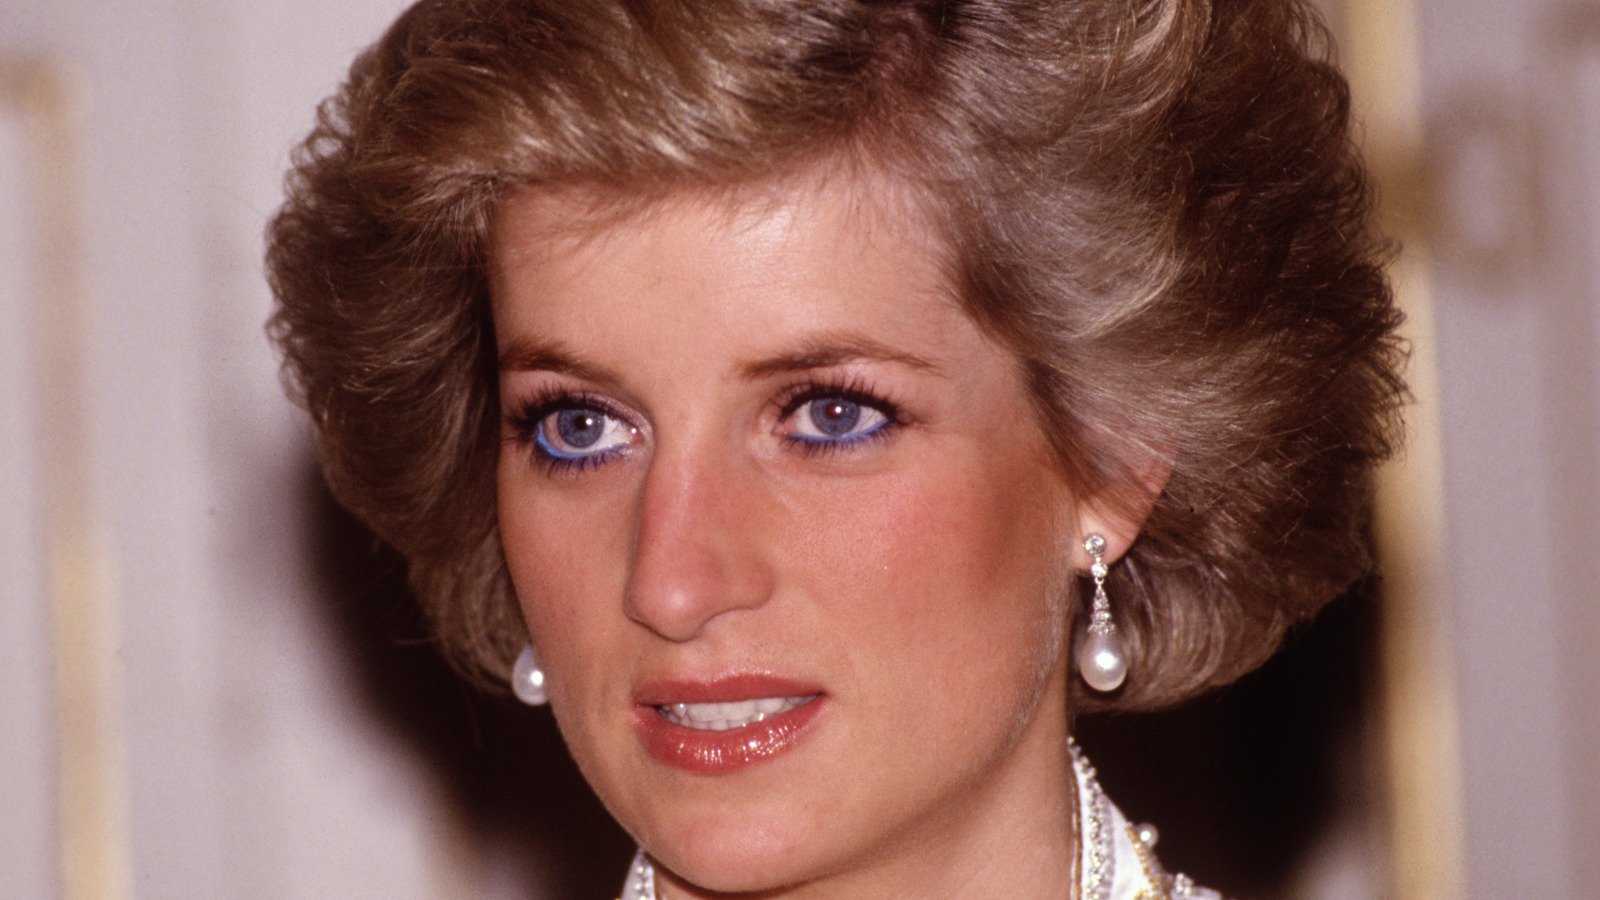 Did This Insensitive Joke Drive A Deeper Wedge Between Charles And Diana?